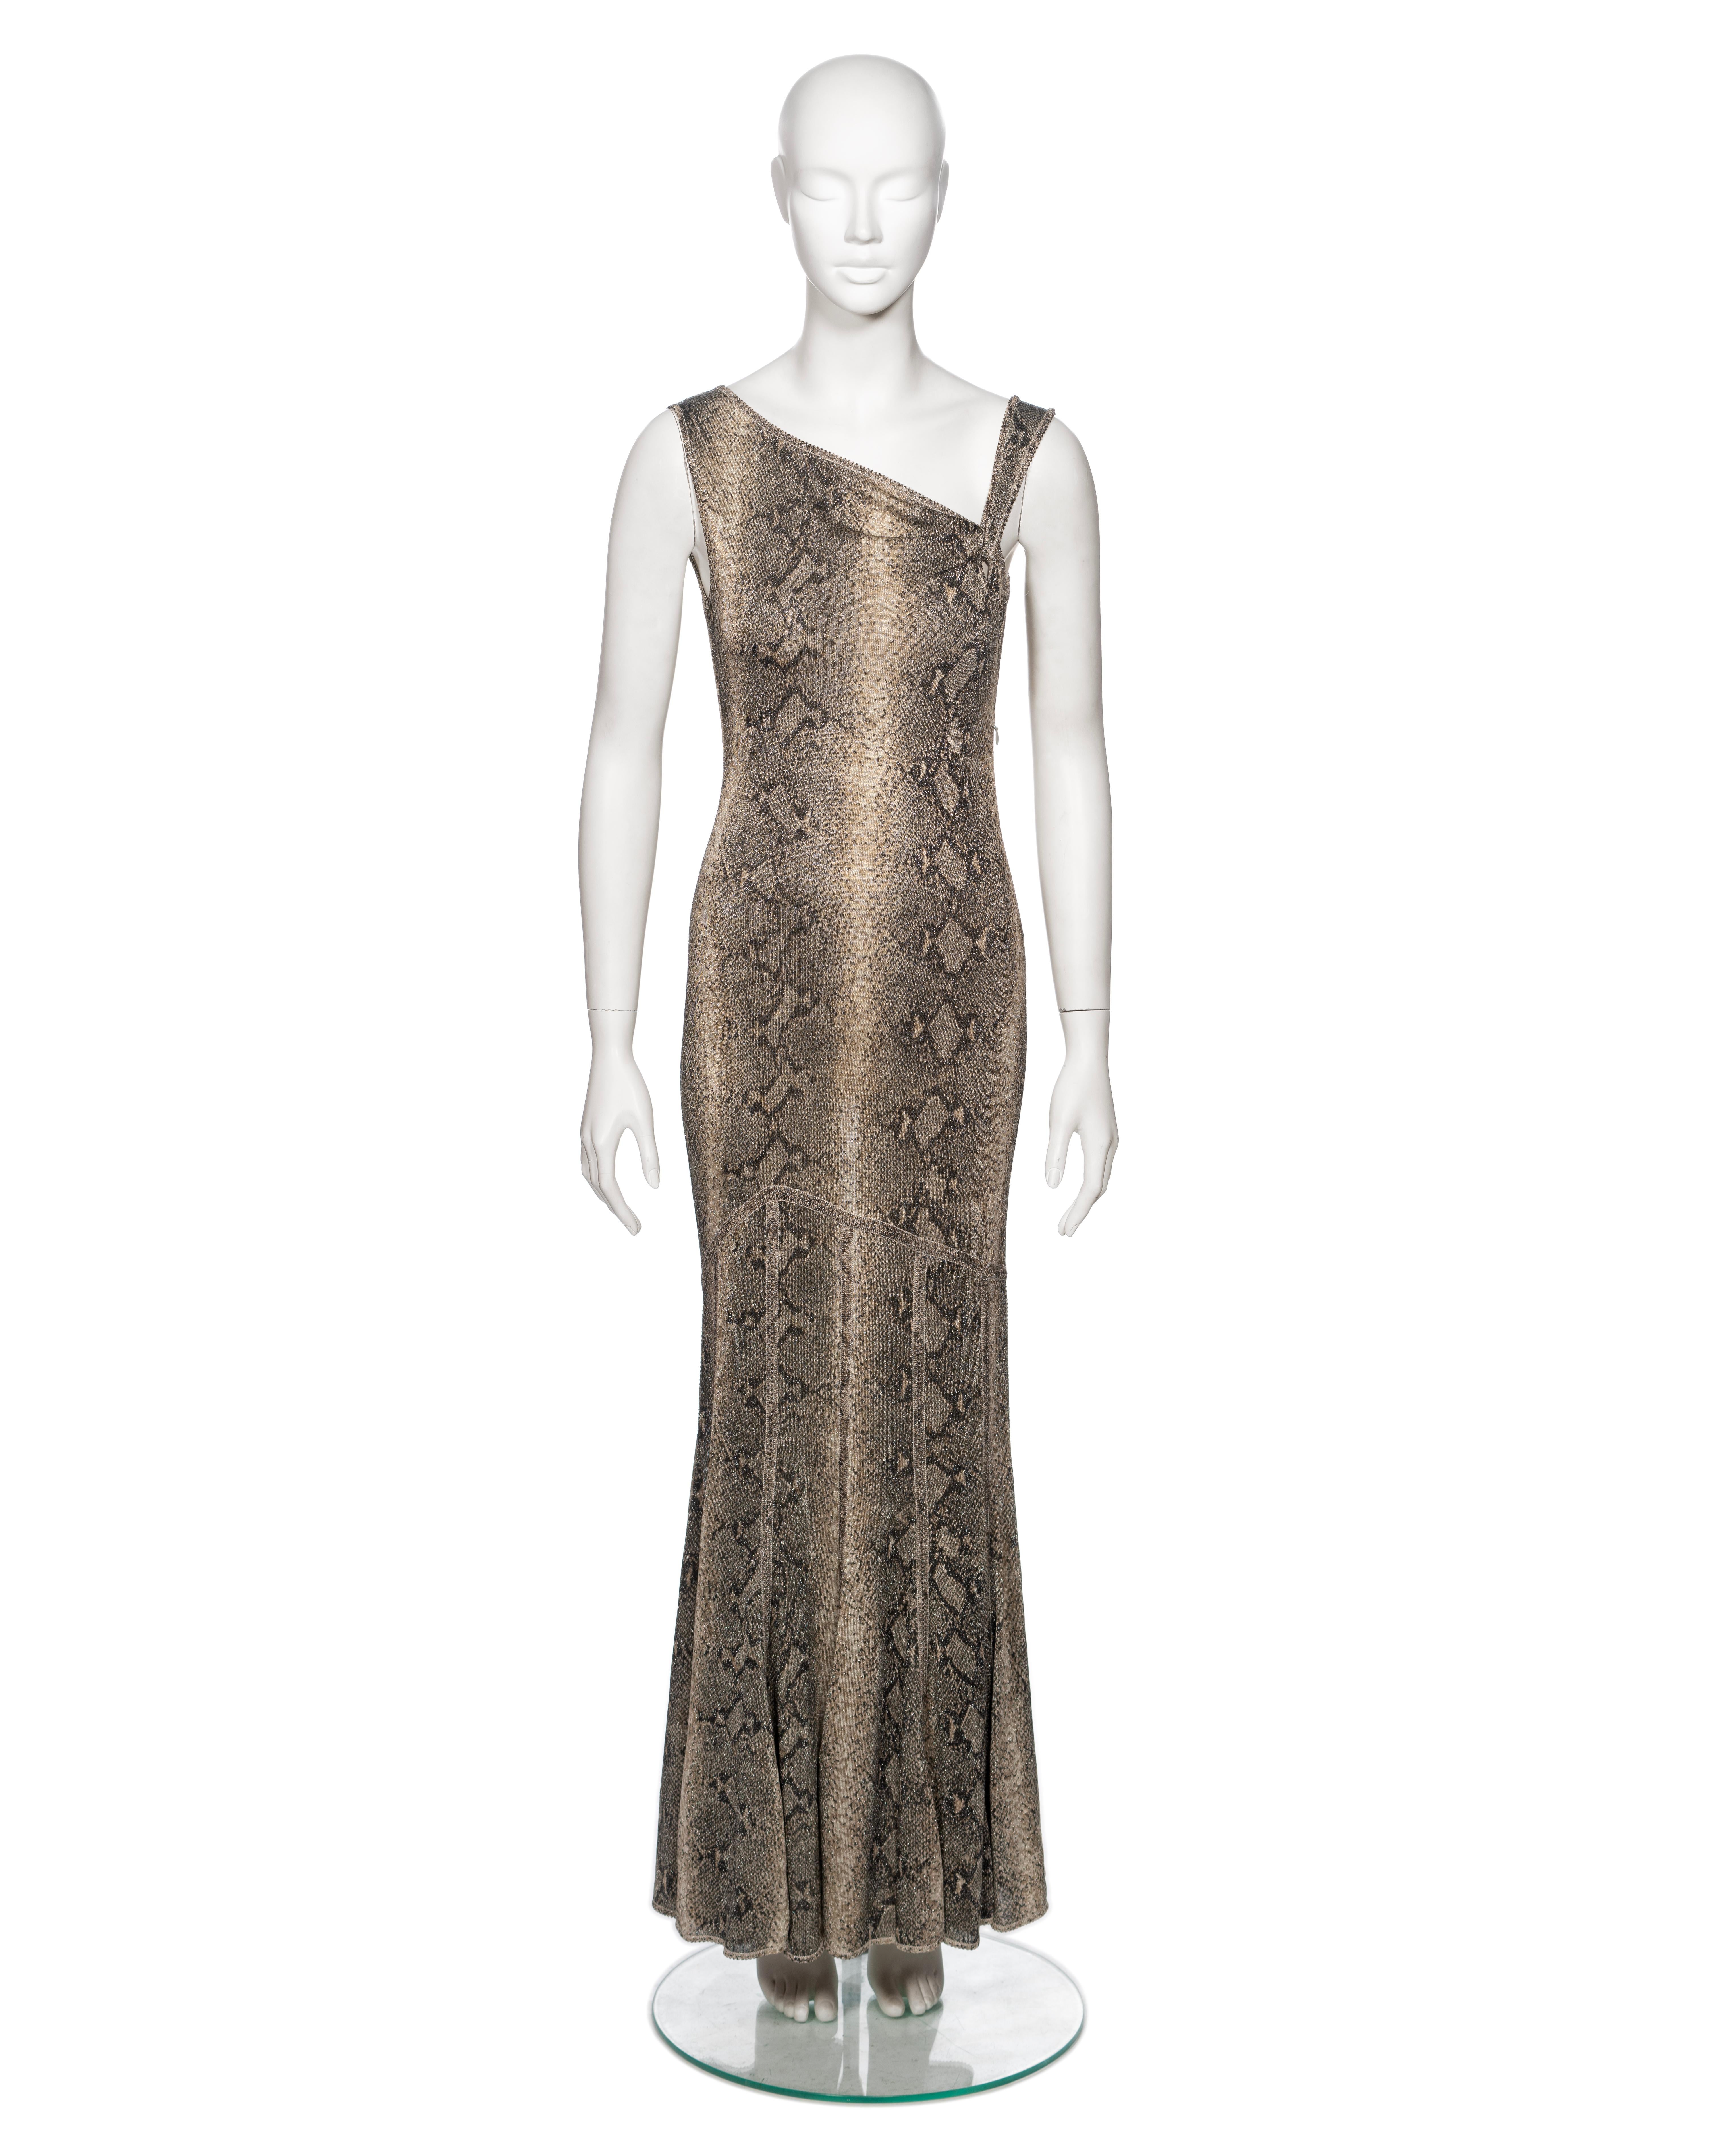 ▪ Brand: John Galliano
▪ Creative Director: John Galliano
▪ Collection: Spring-Summer 2000
▪ Sold by: One of a Kind Archive
▪ Fabric: Brown snakeskin print knit jersey of 84% Viscose and 16% Polyester
▪ Details: Asymmetric neckline and shoulder